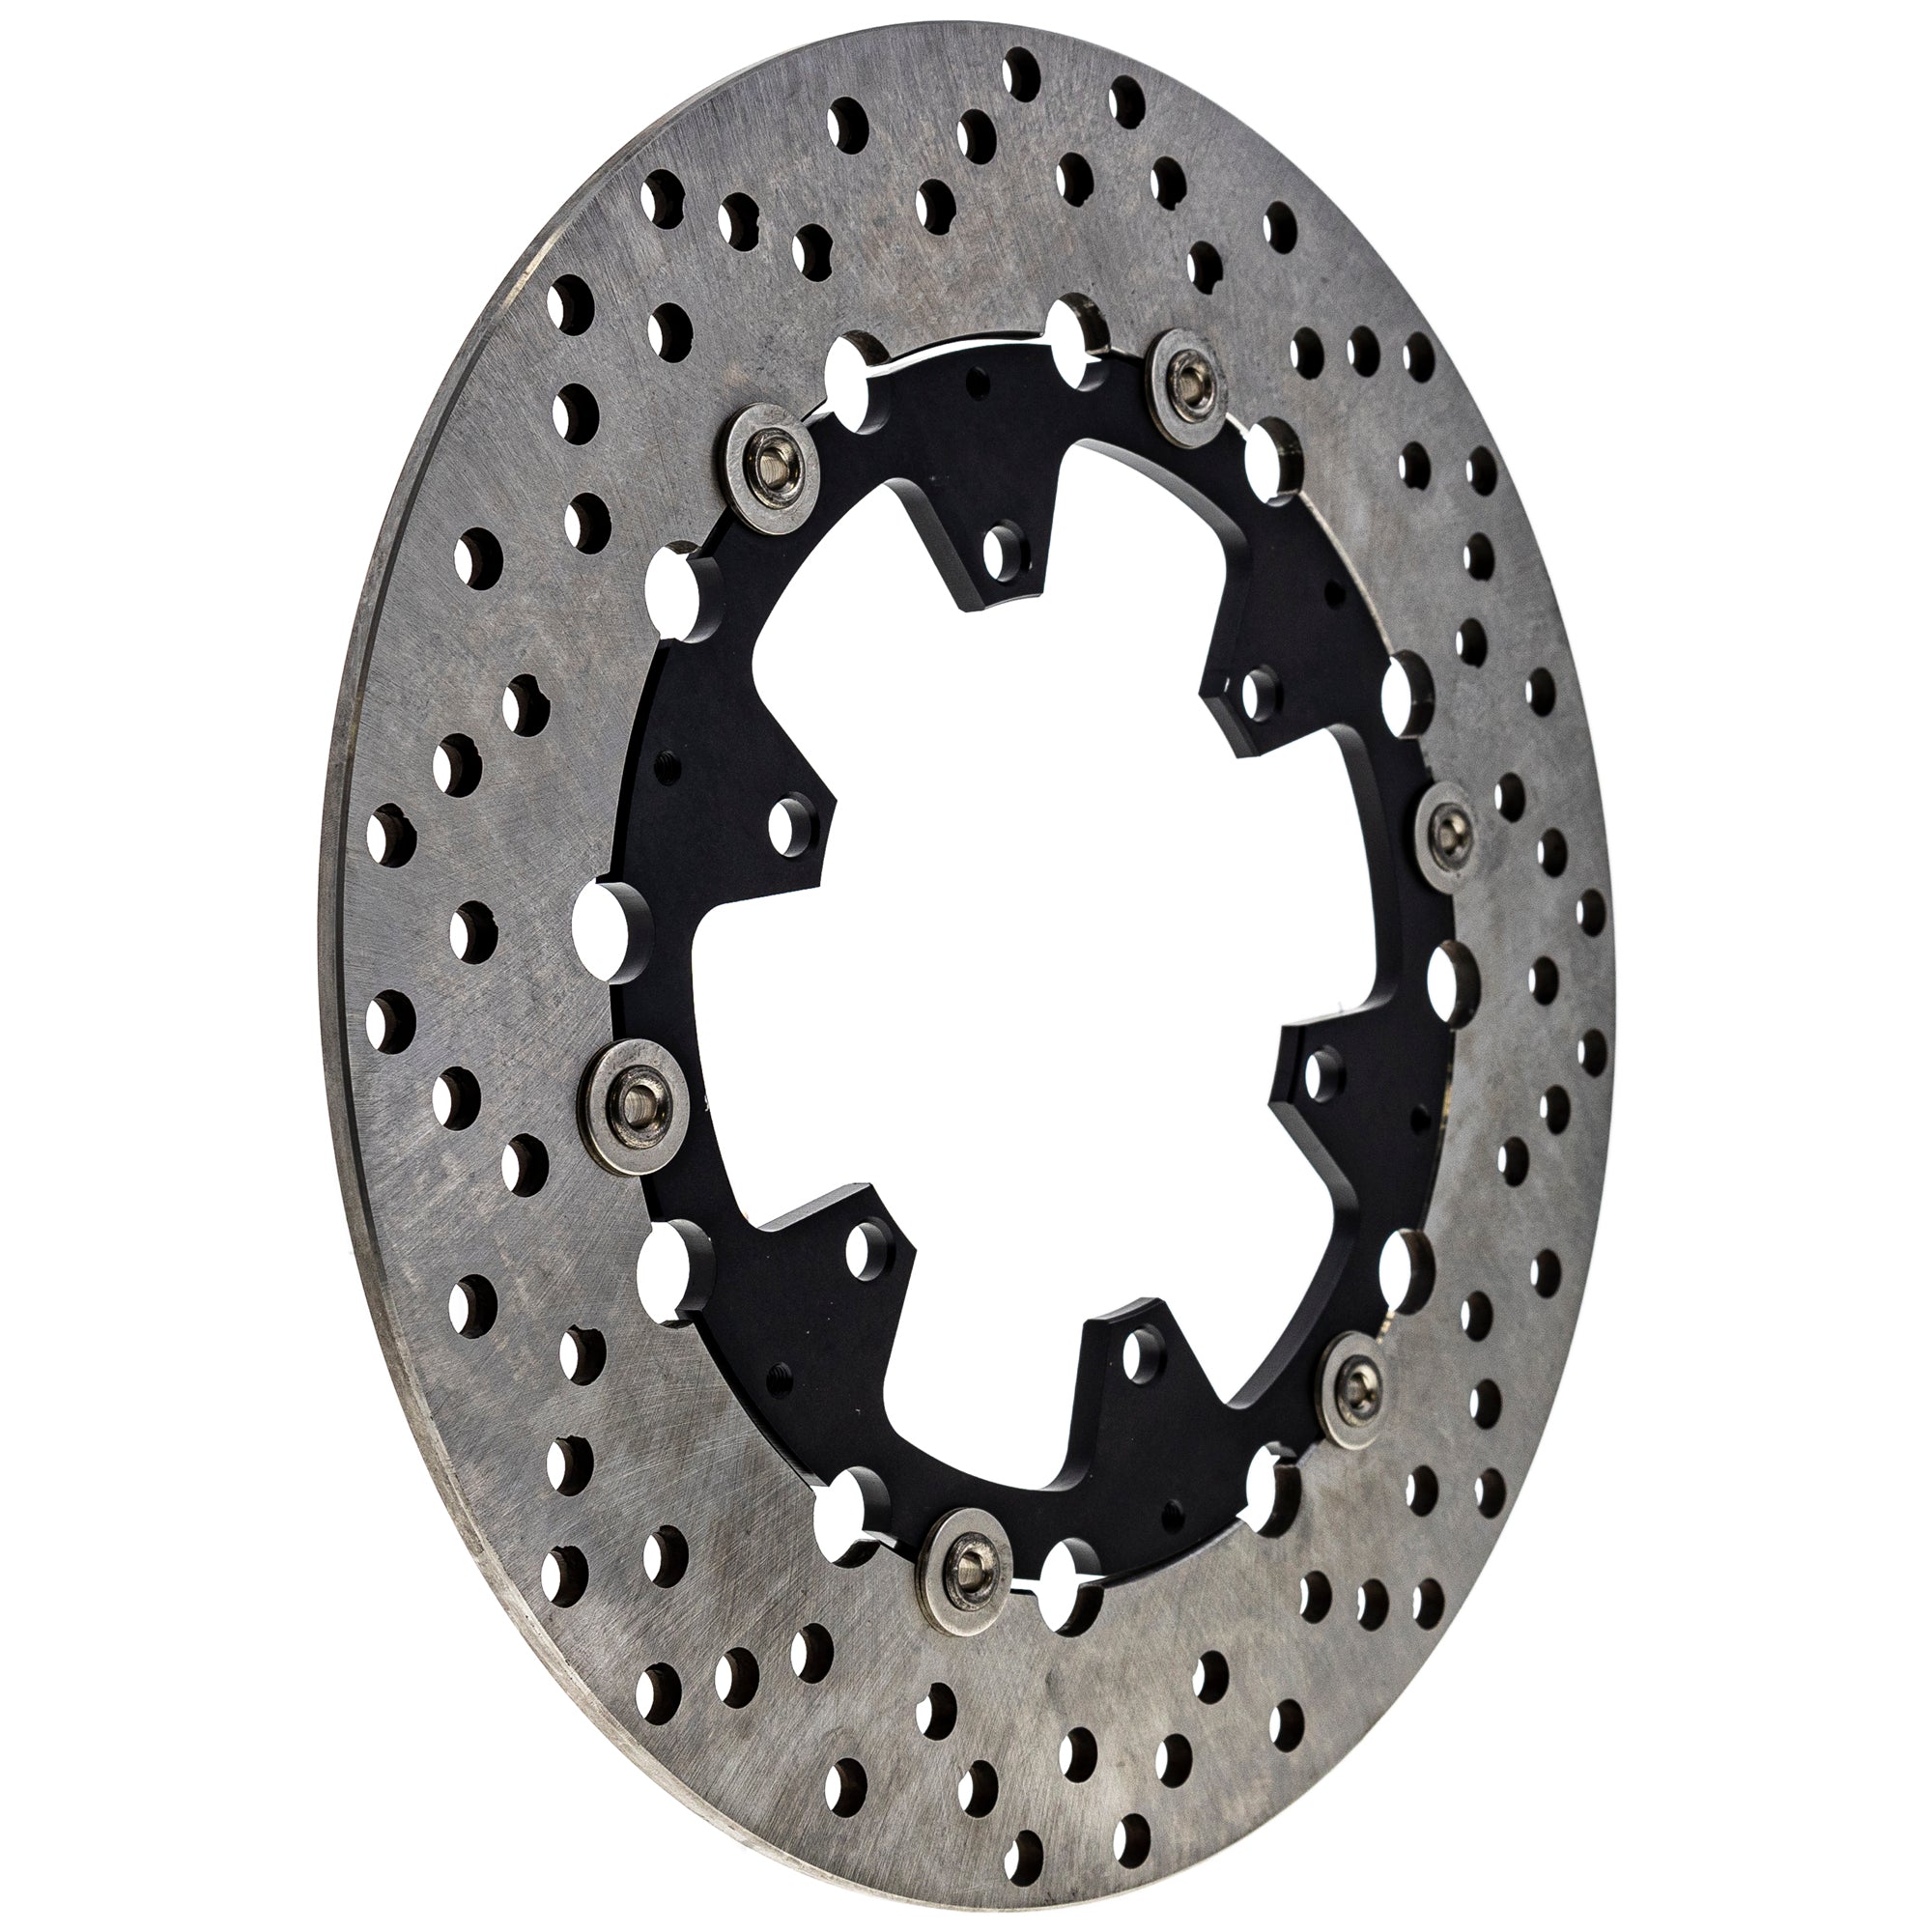 Front Brake Rotor For BMW 34-51-2-310-816 34512310816 34-11-2-316-069 34112316069 34-11-2-310-484